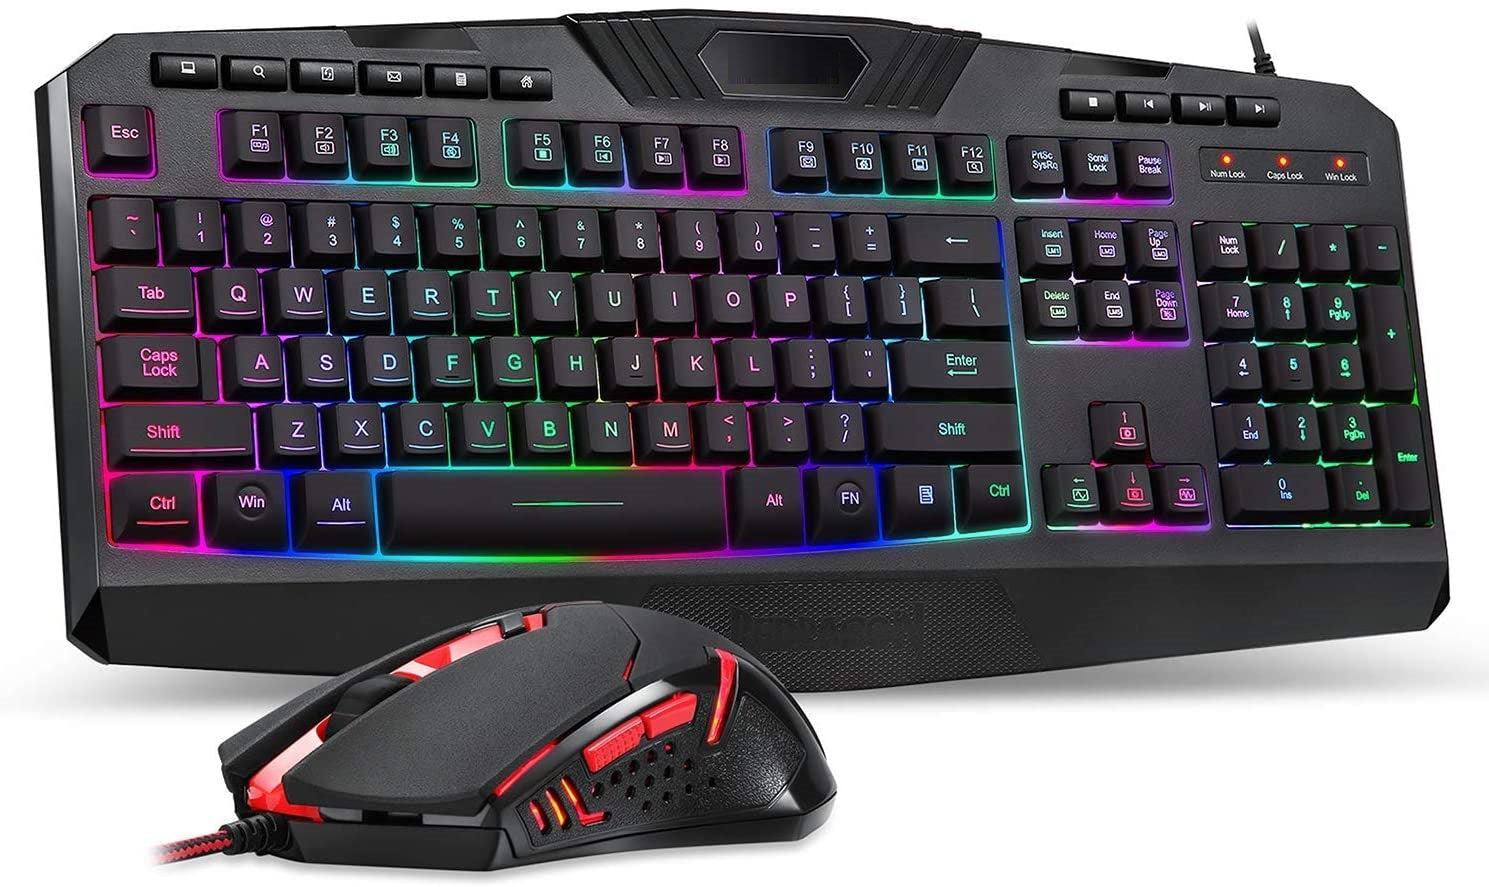 Tecisoft S101 Wired Gaming Keyboard And Mouse Combo Rgb Backlit With Multimedia Keys